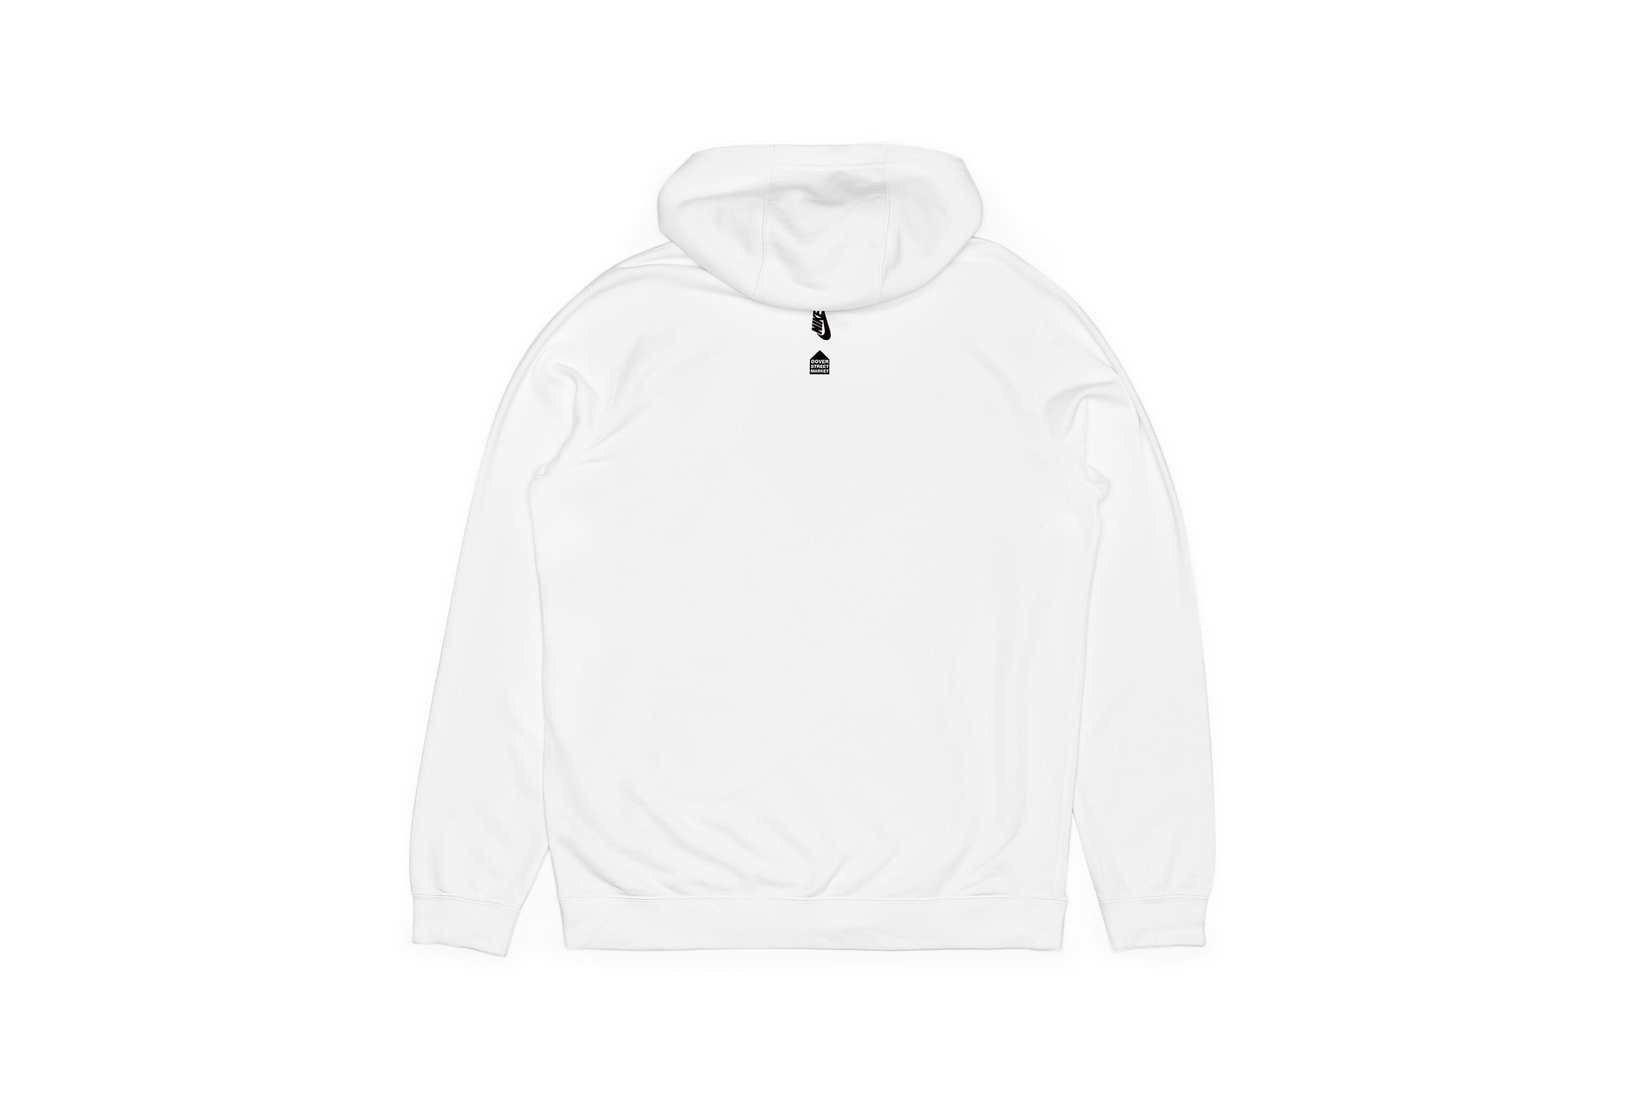 Nike x Dover Street Market Just Do It Hoodie White